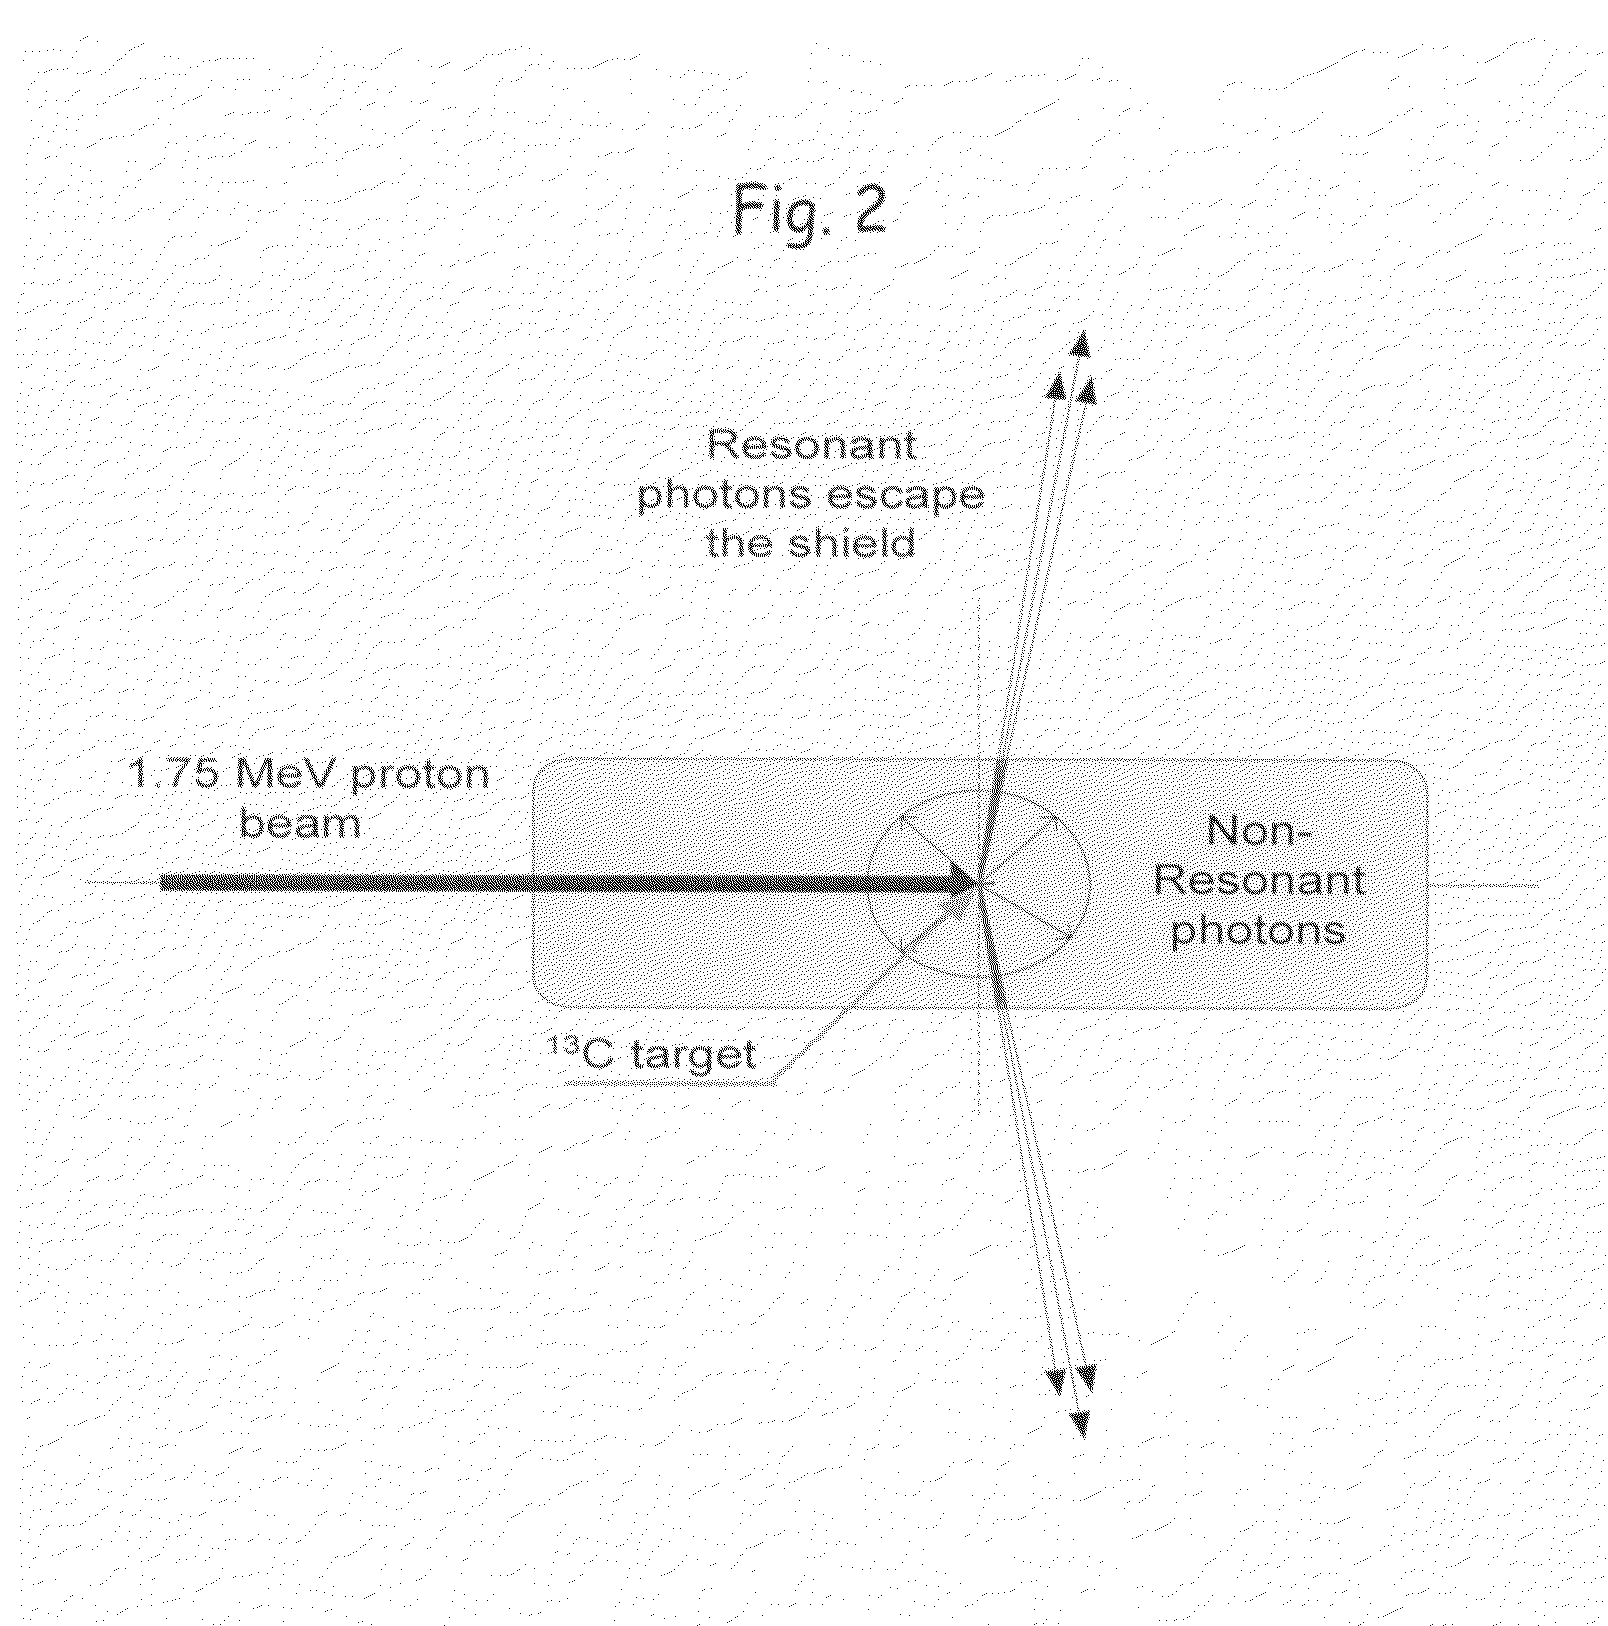 System and method for detecting concealed nuclear materials, radiological materials and chemical explosives